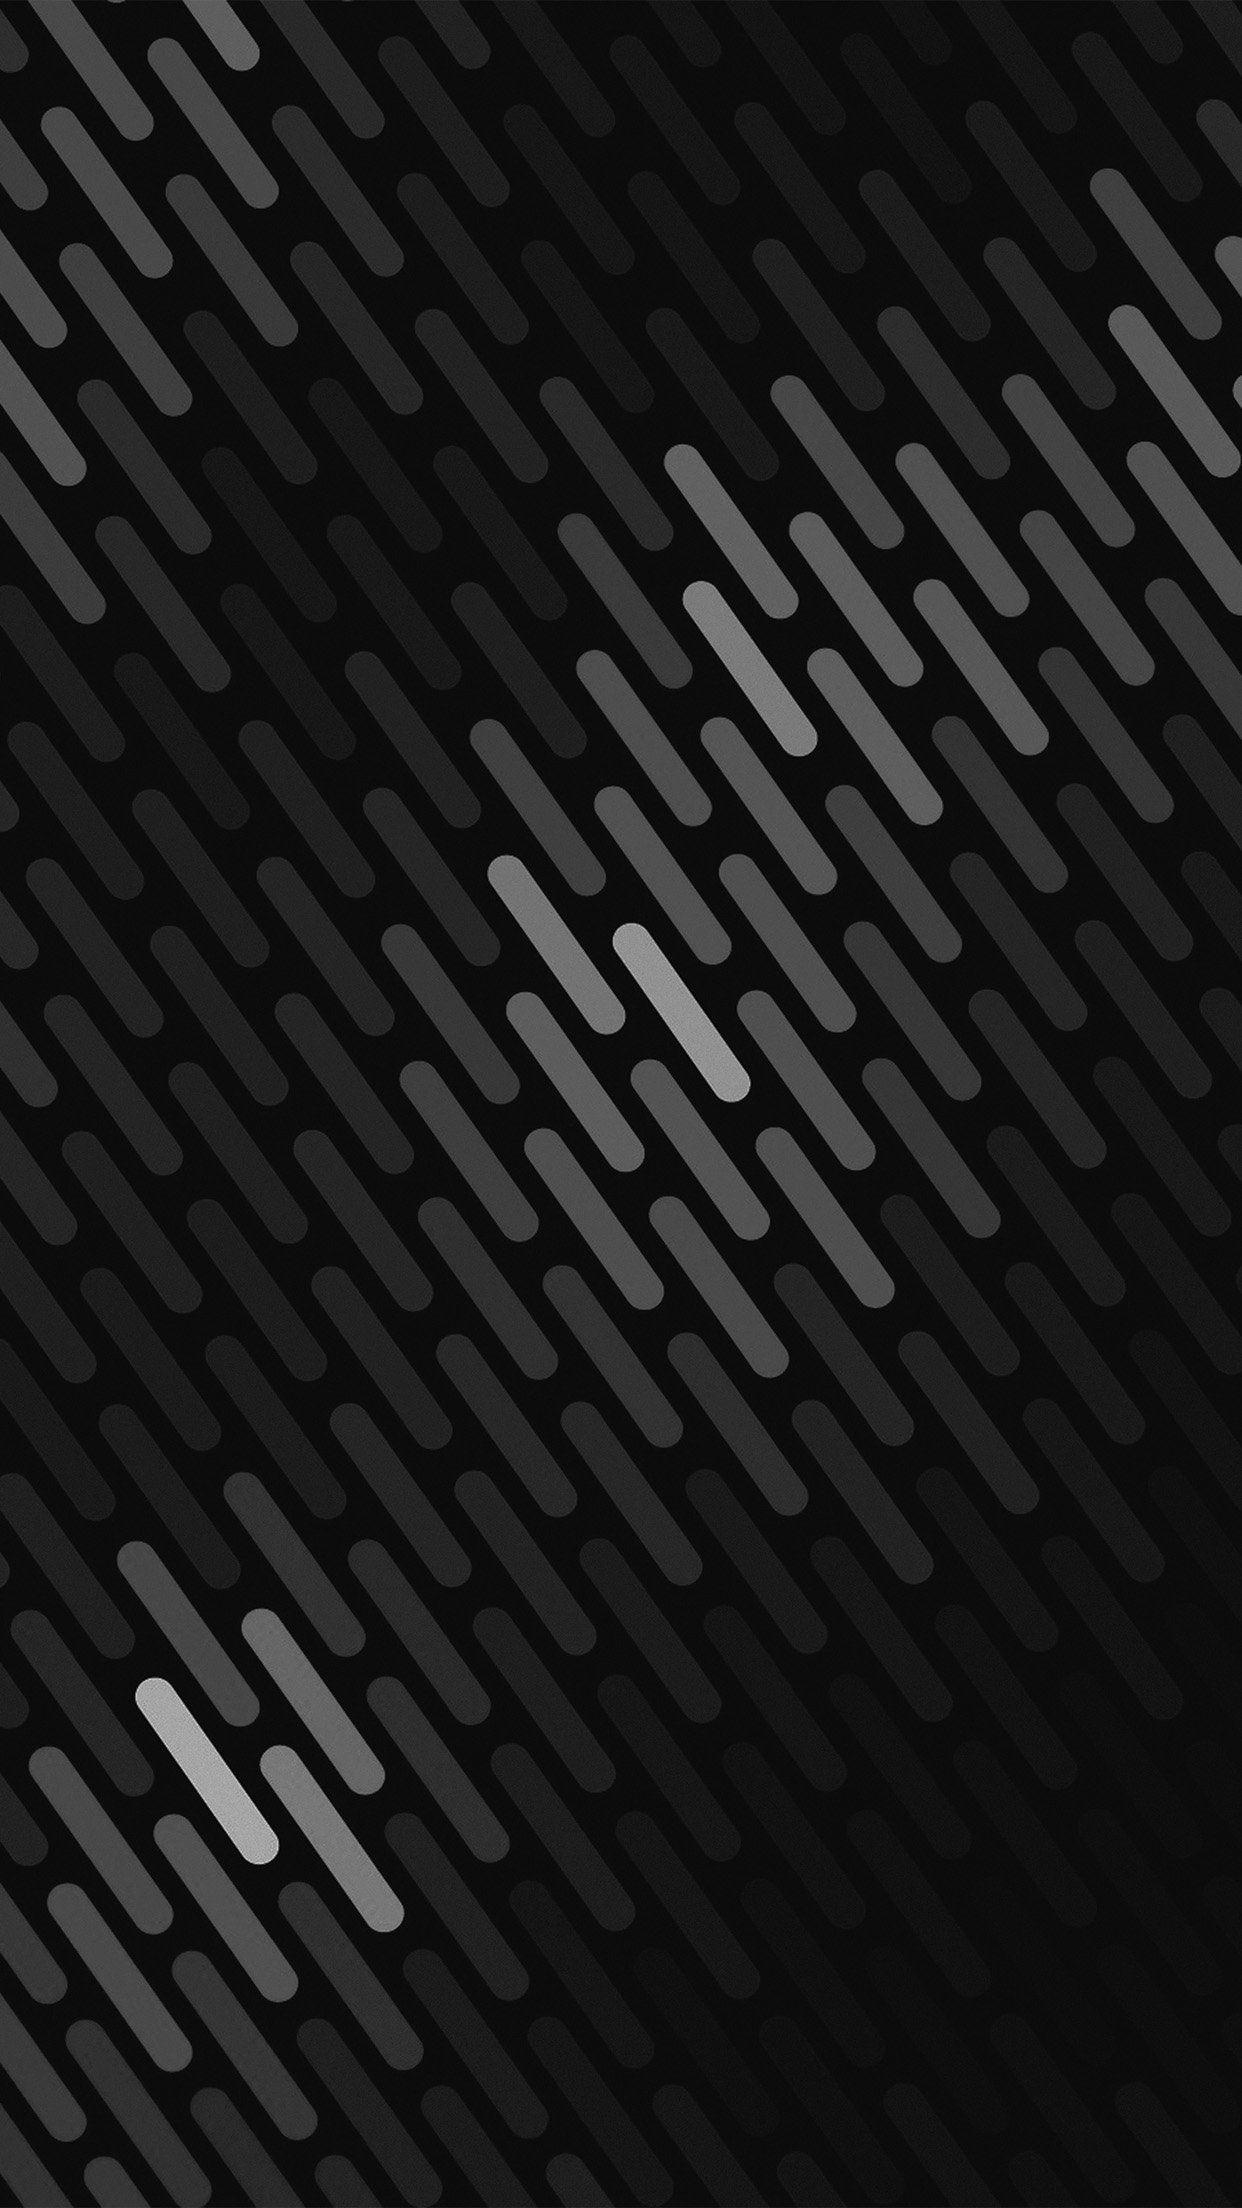 Abstract Dark Bw Dots Lines Pattern Android wallpaper HD